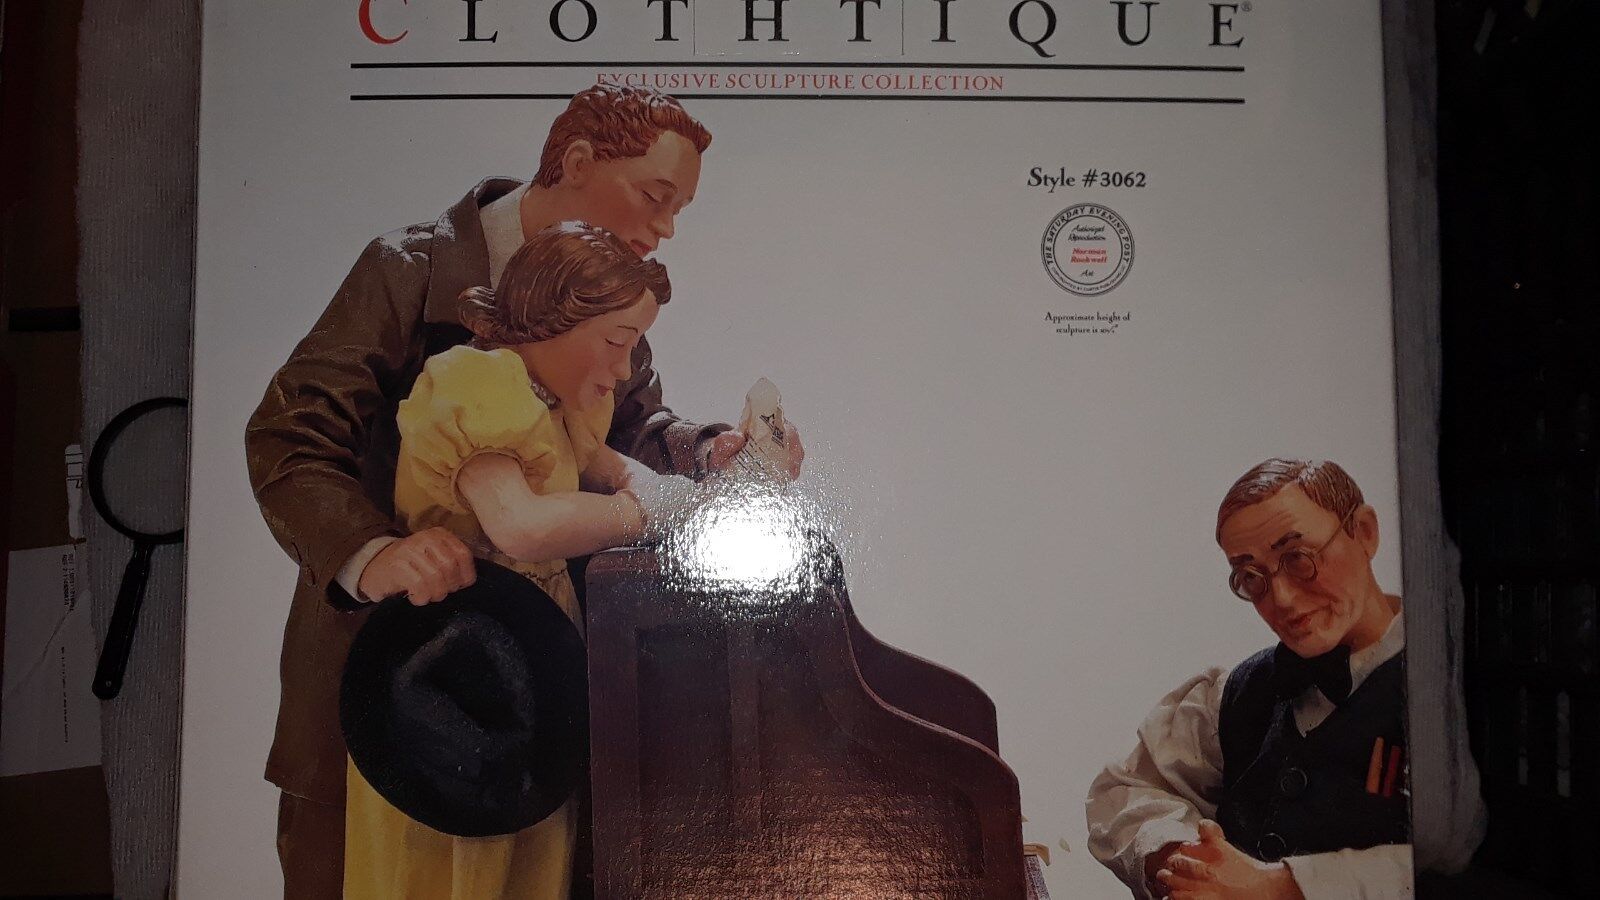 Dept 56 Possible Dreams Clothtique NORMAN ROCKWELL Marriage License Figurine